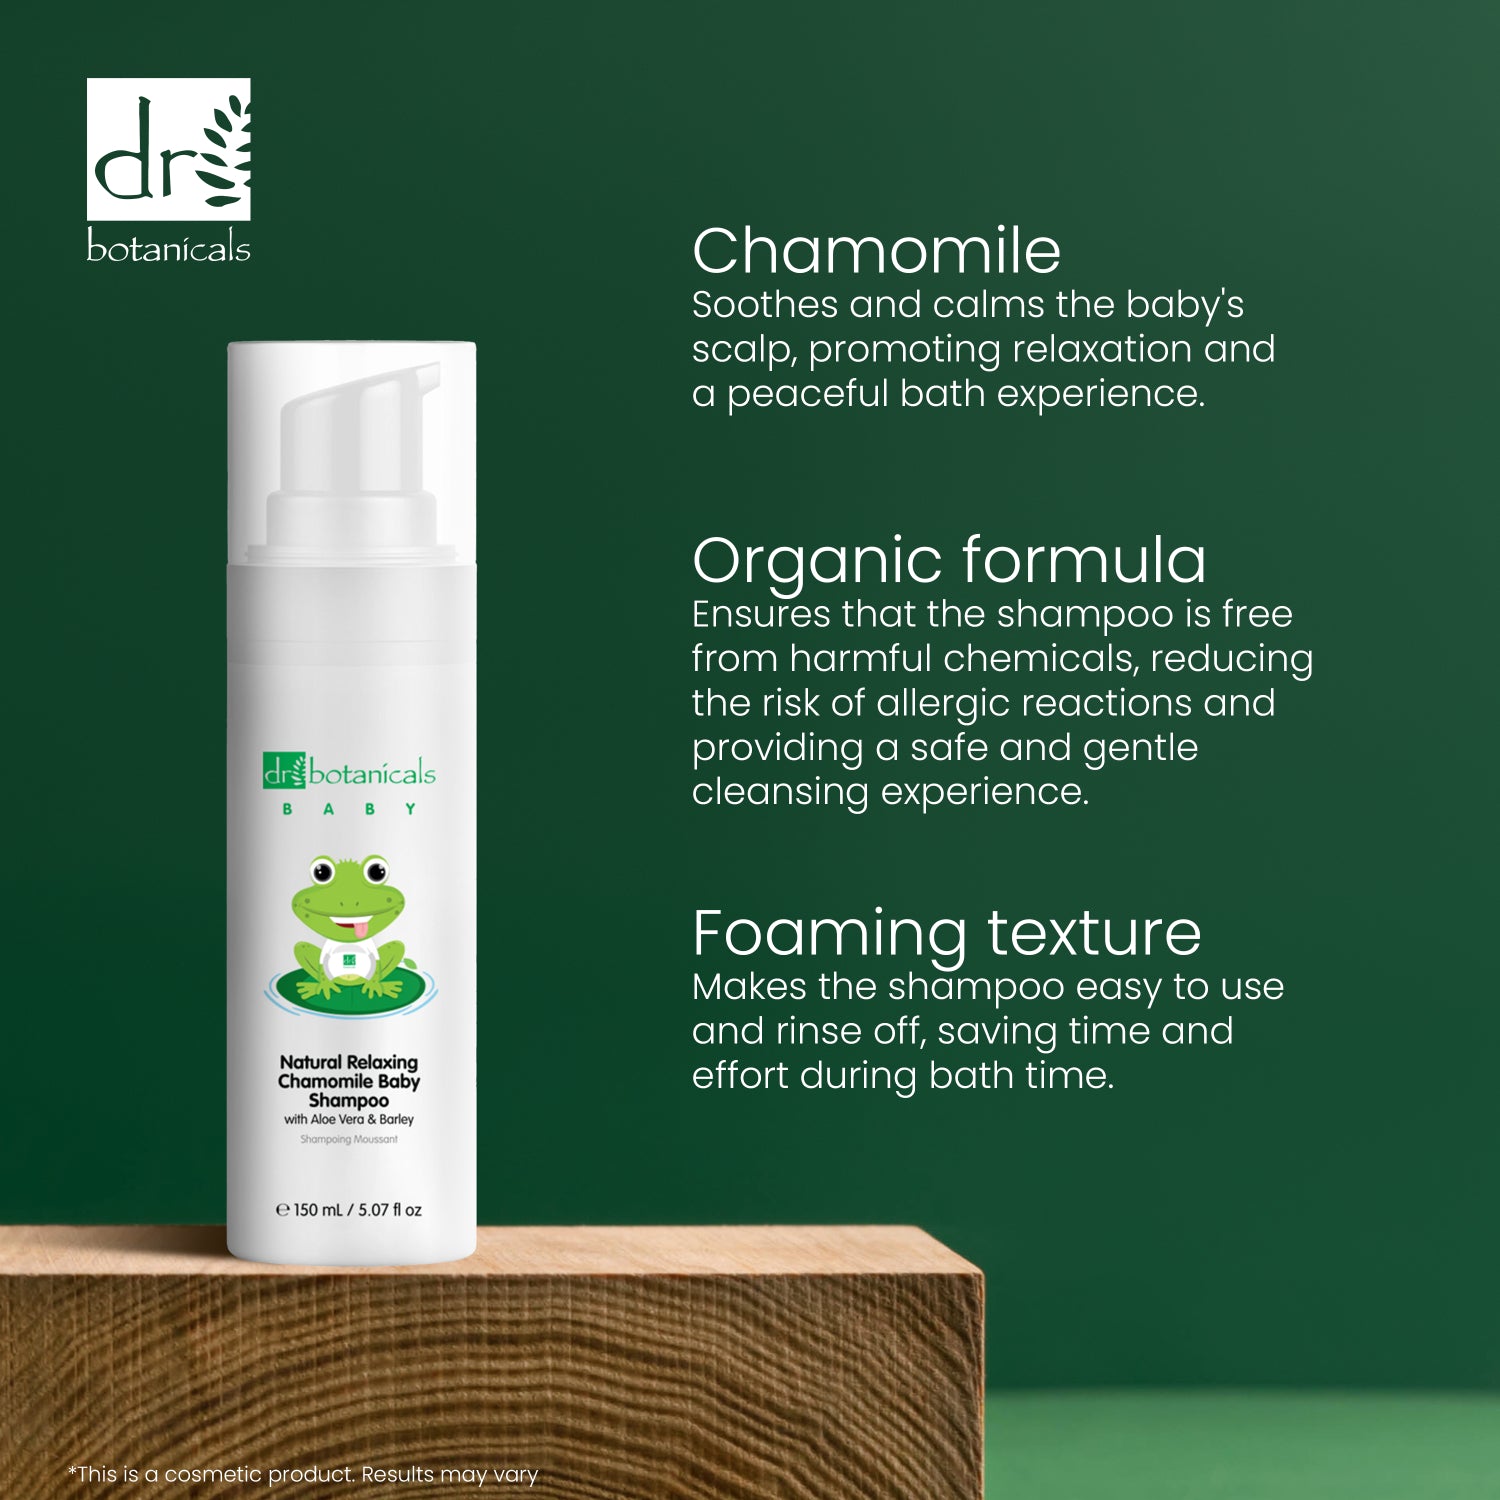 Dr. Botanicals Natural Relaxing Kamille Baby Shampoo 